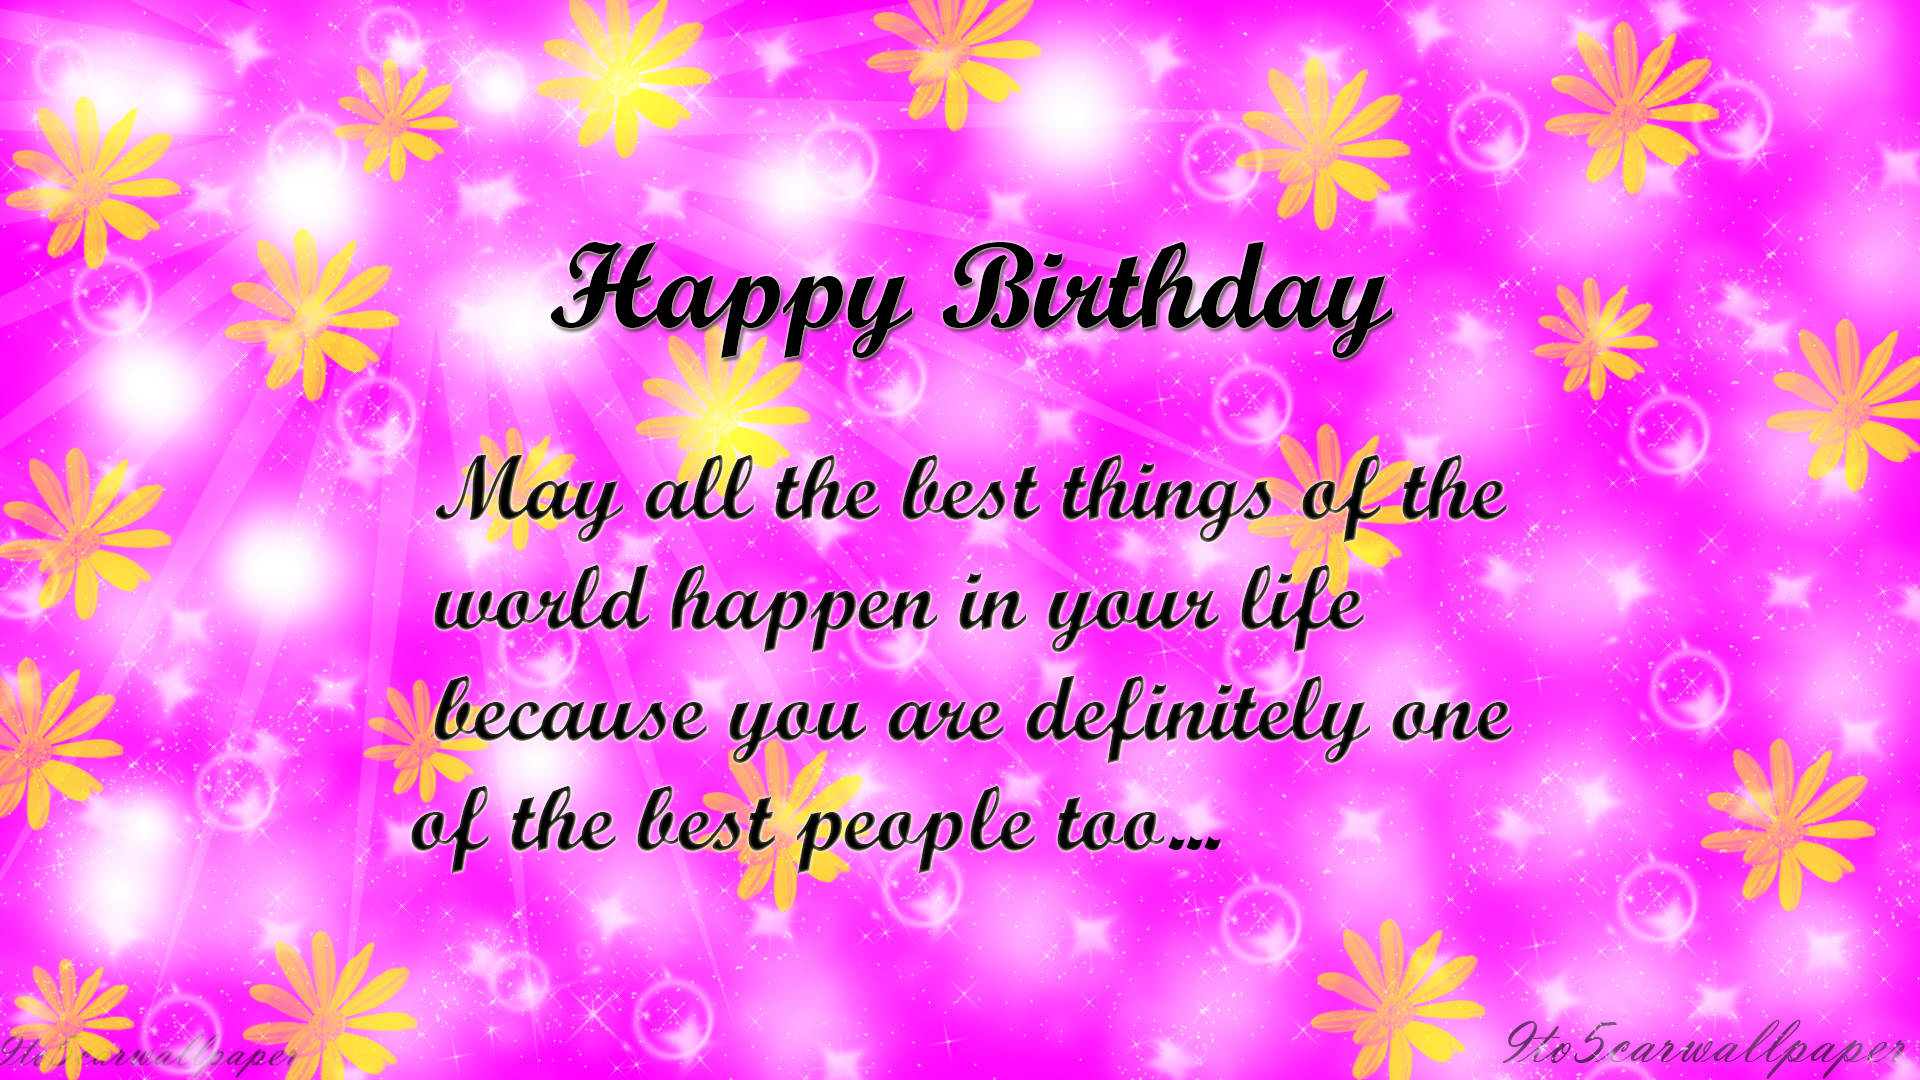 best-birthday-quotes-images-and-wallpapers-my-site